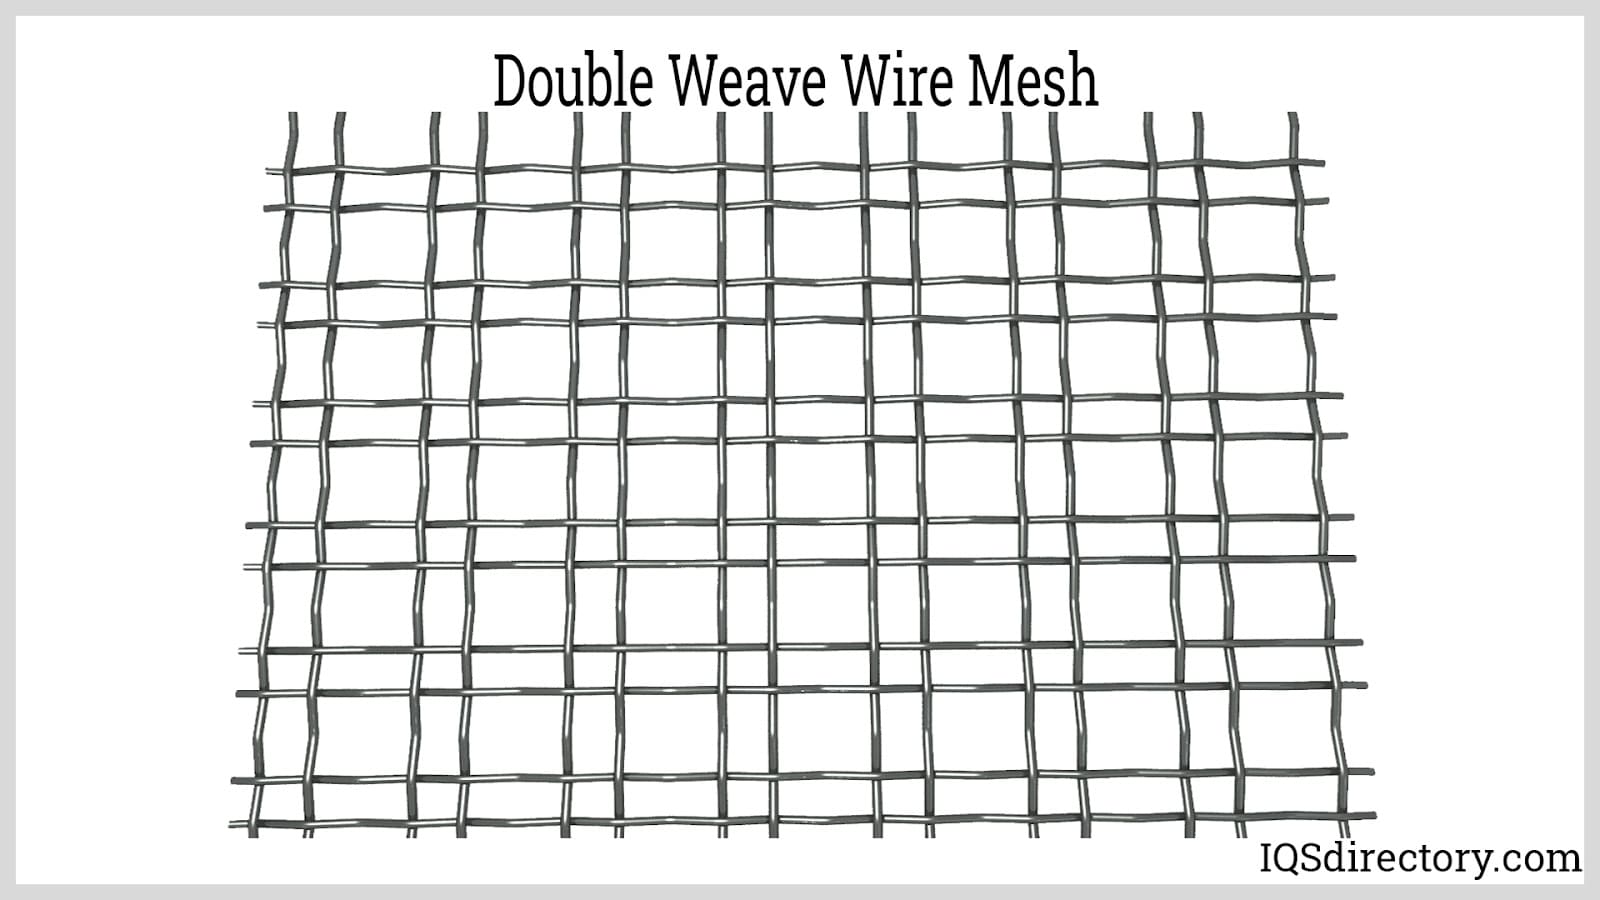 Double Weave Wire Mesh